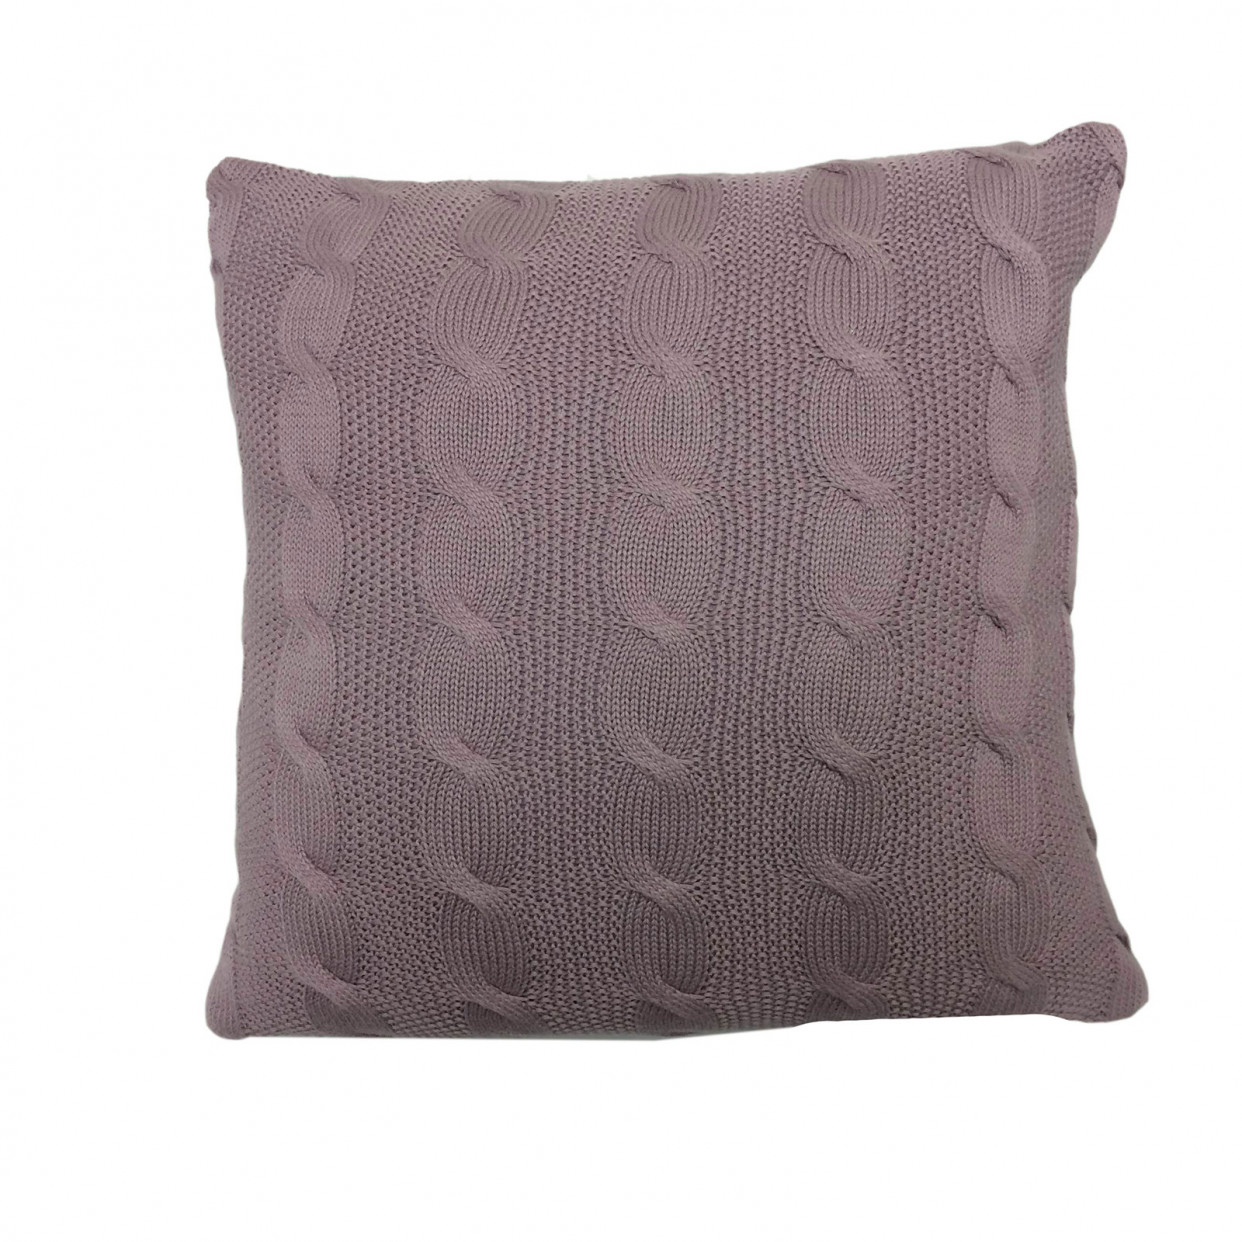 Highams Cable Knit 100% Cotton Cushion Cover - Muted Heather>